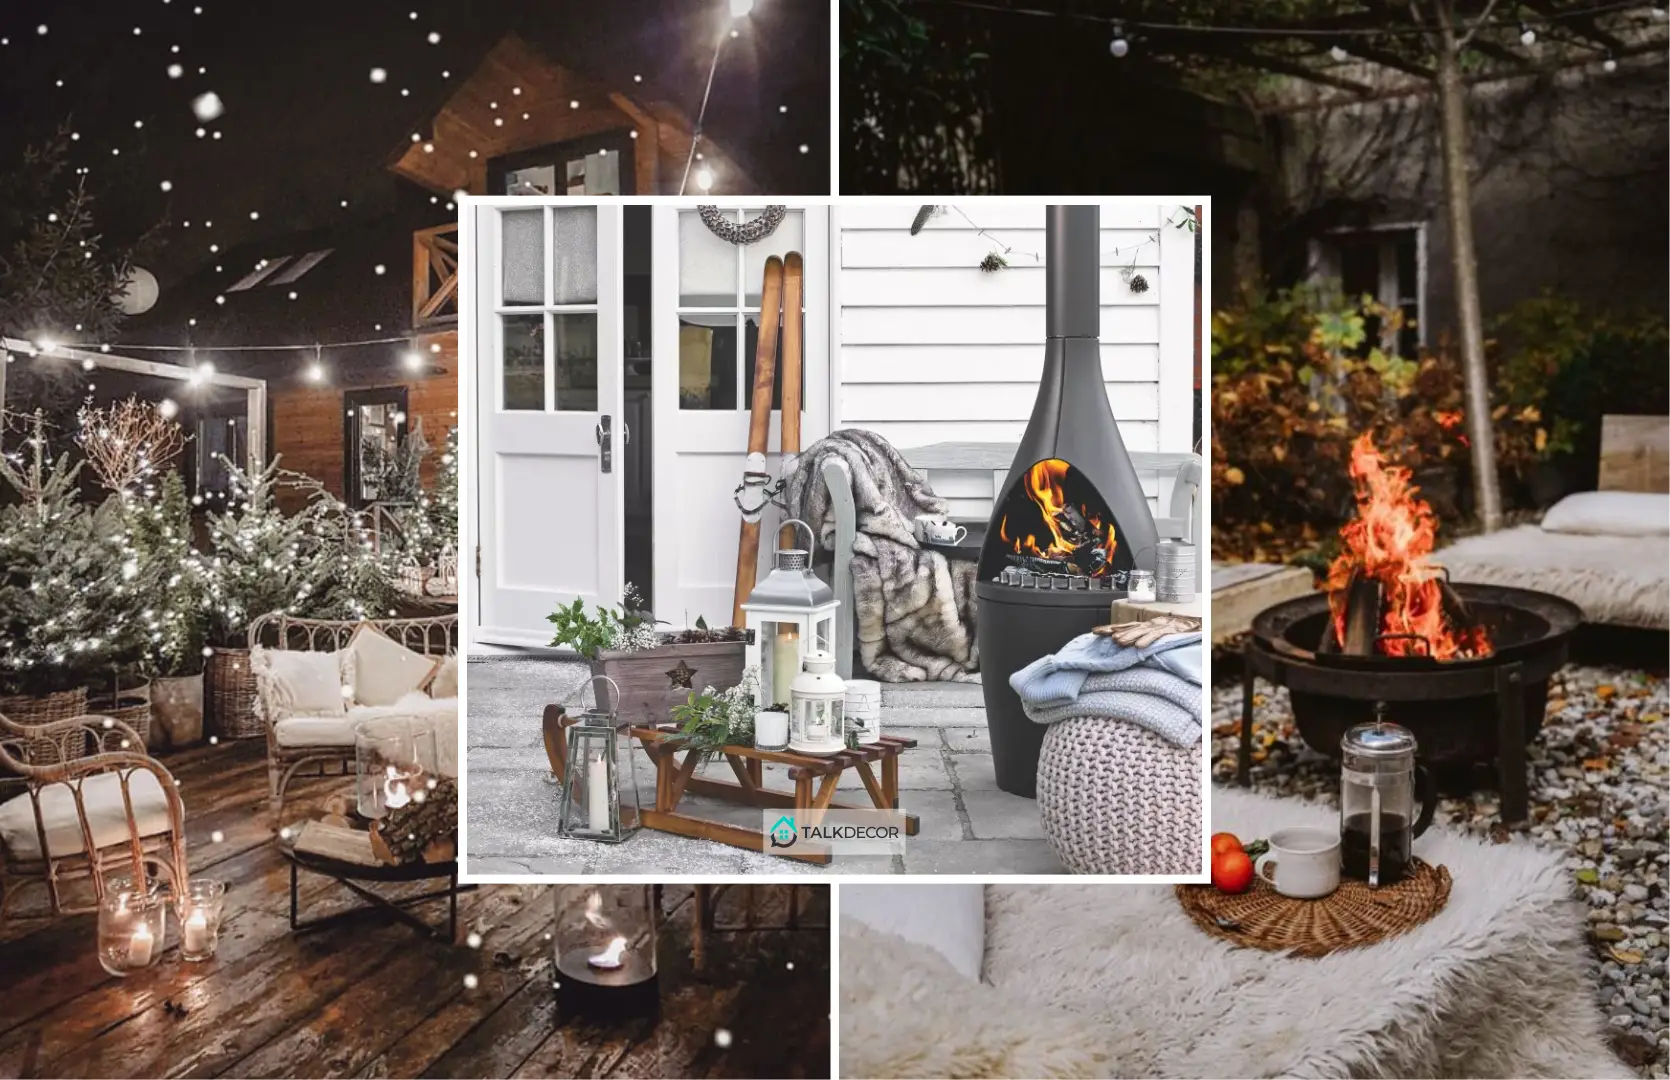 How to Make Your Patio Cozy during Winter